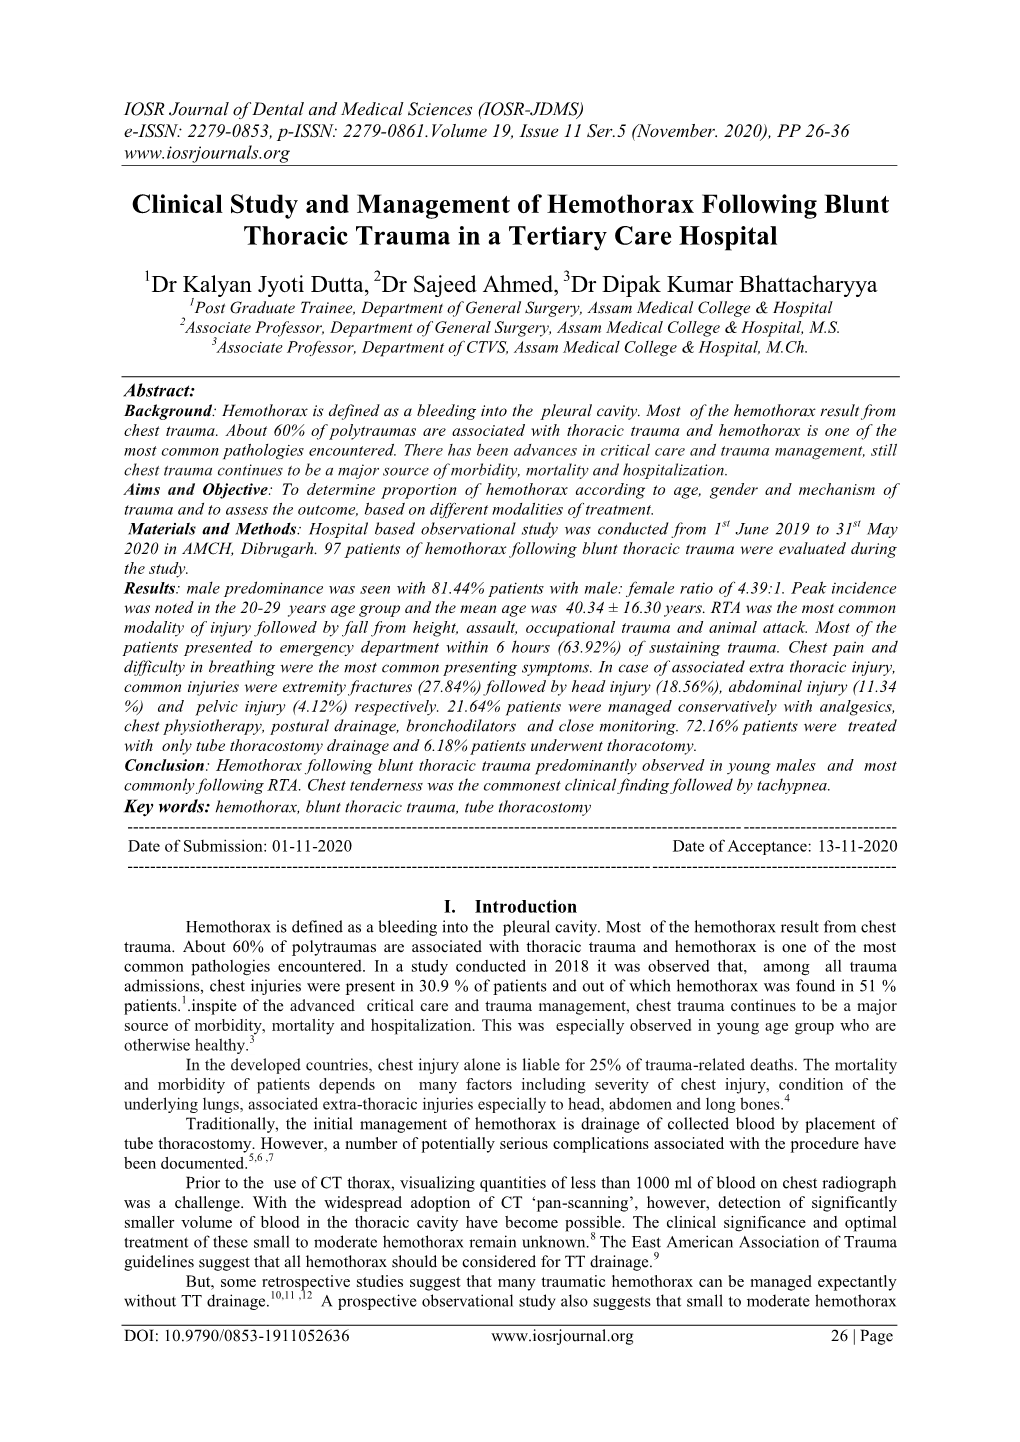 Clinical Study and Management of Hemothorax Following Blunt Thoracic Trauma in a Tertiary Care Hospital